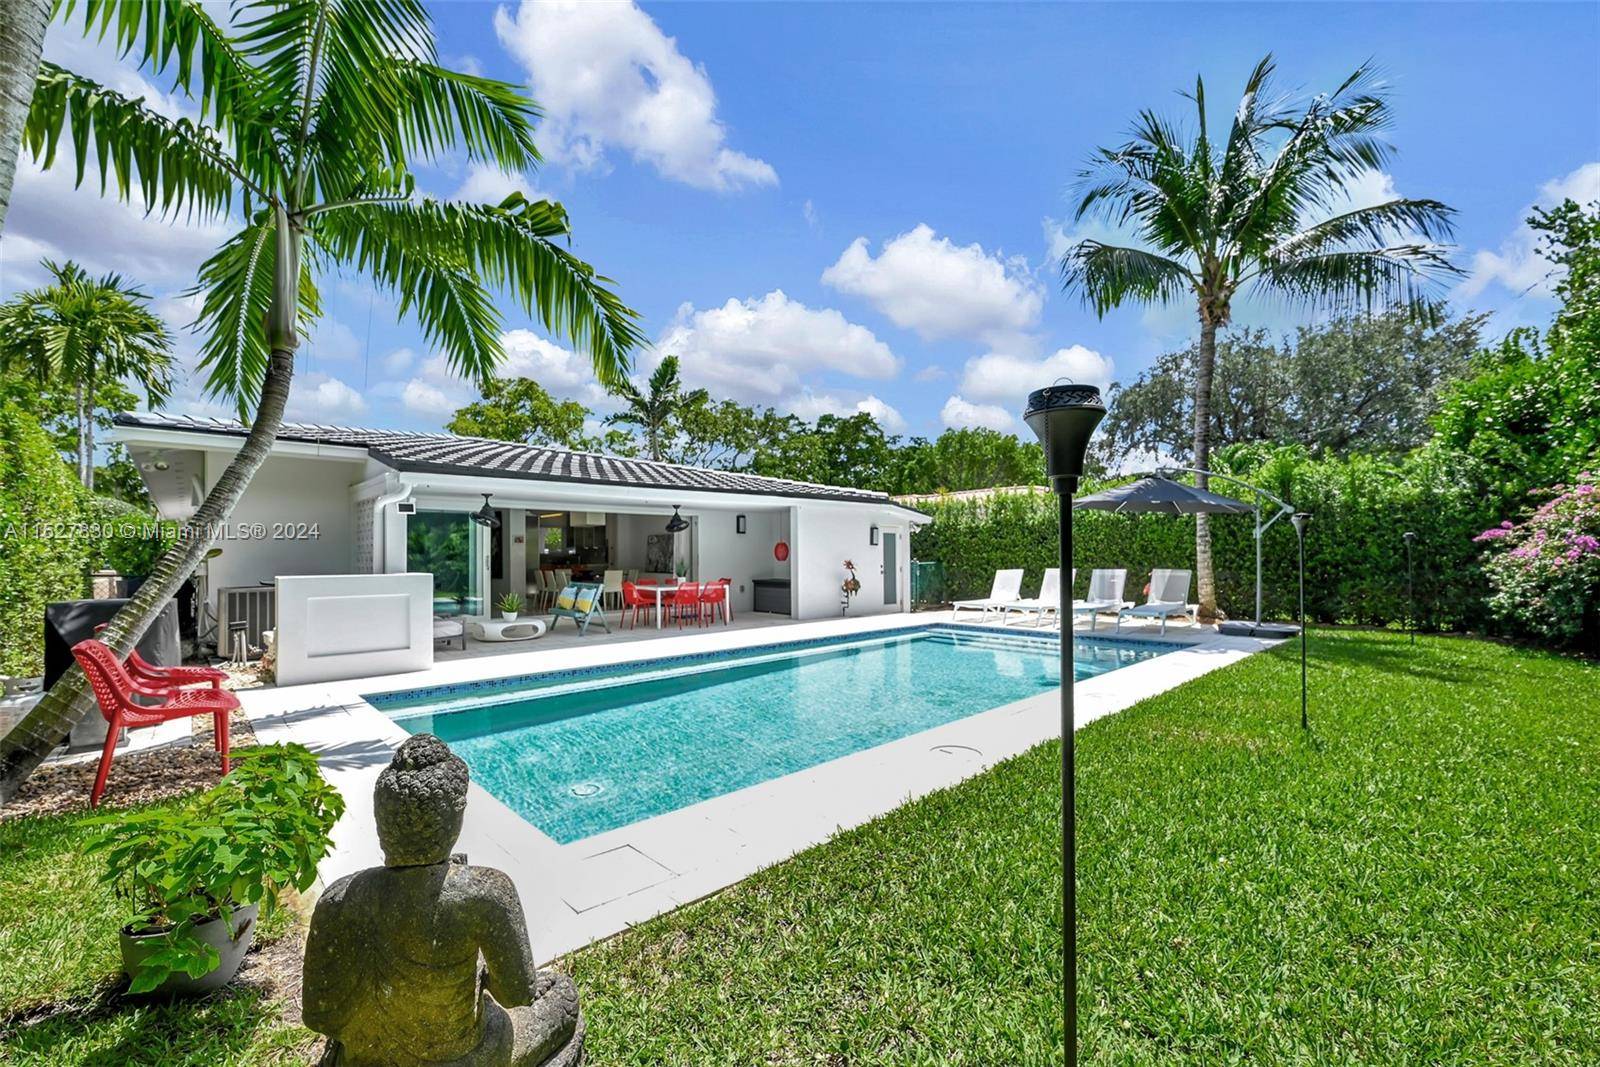 Excellent opportunity to own this modern home on prime location of coral gables golden triangle steps from Biltmore Hotel.